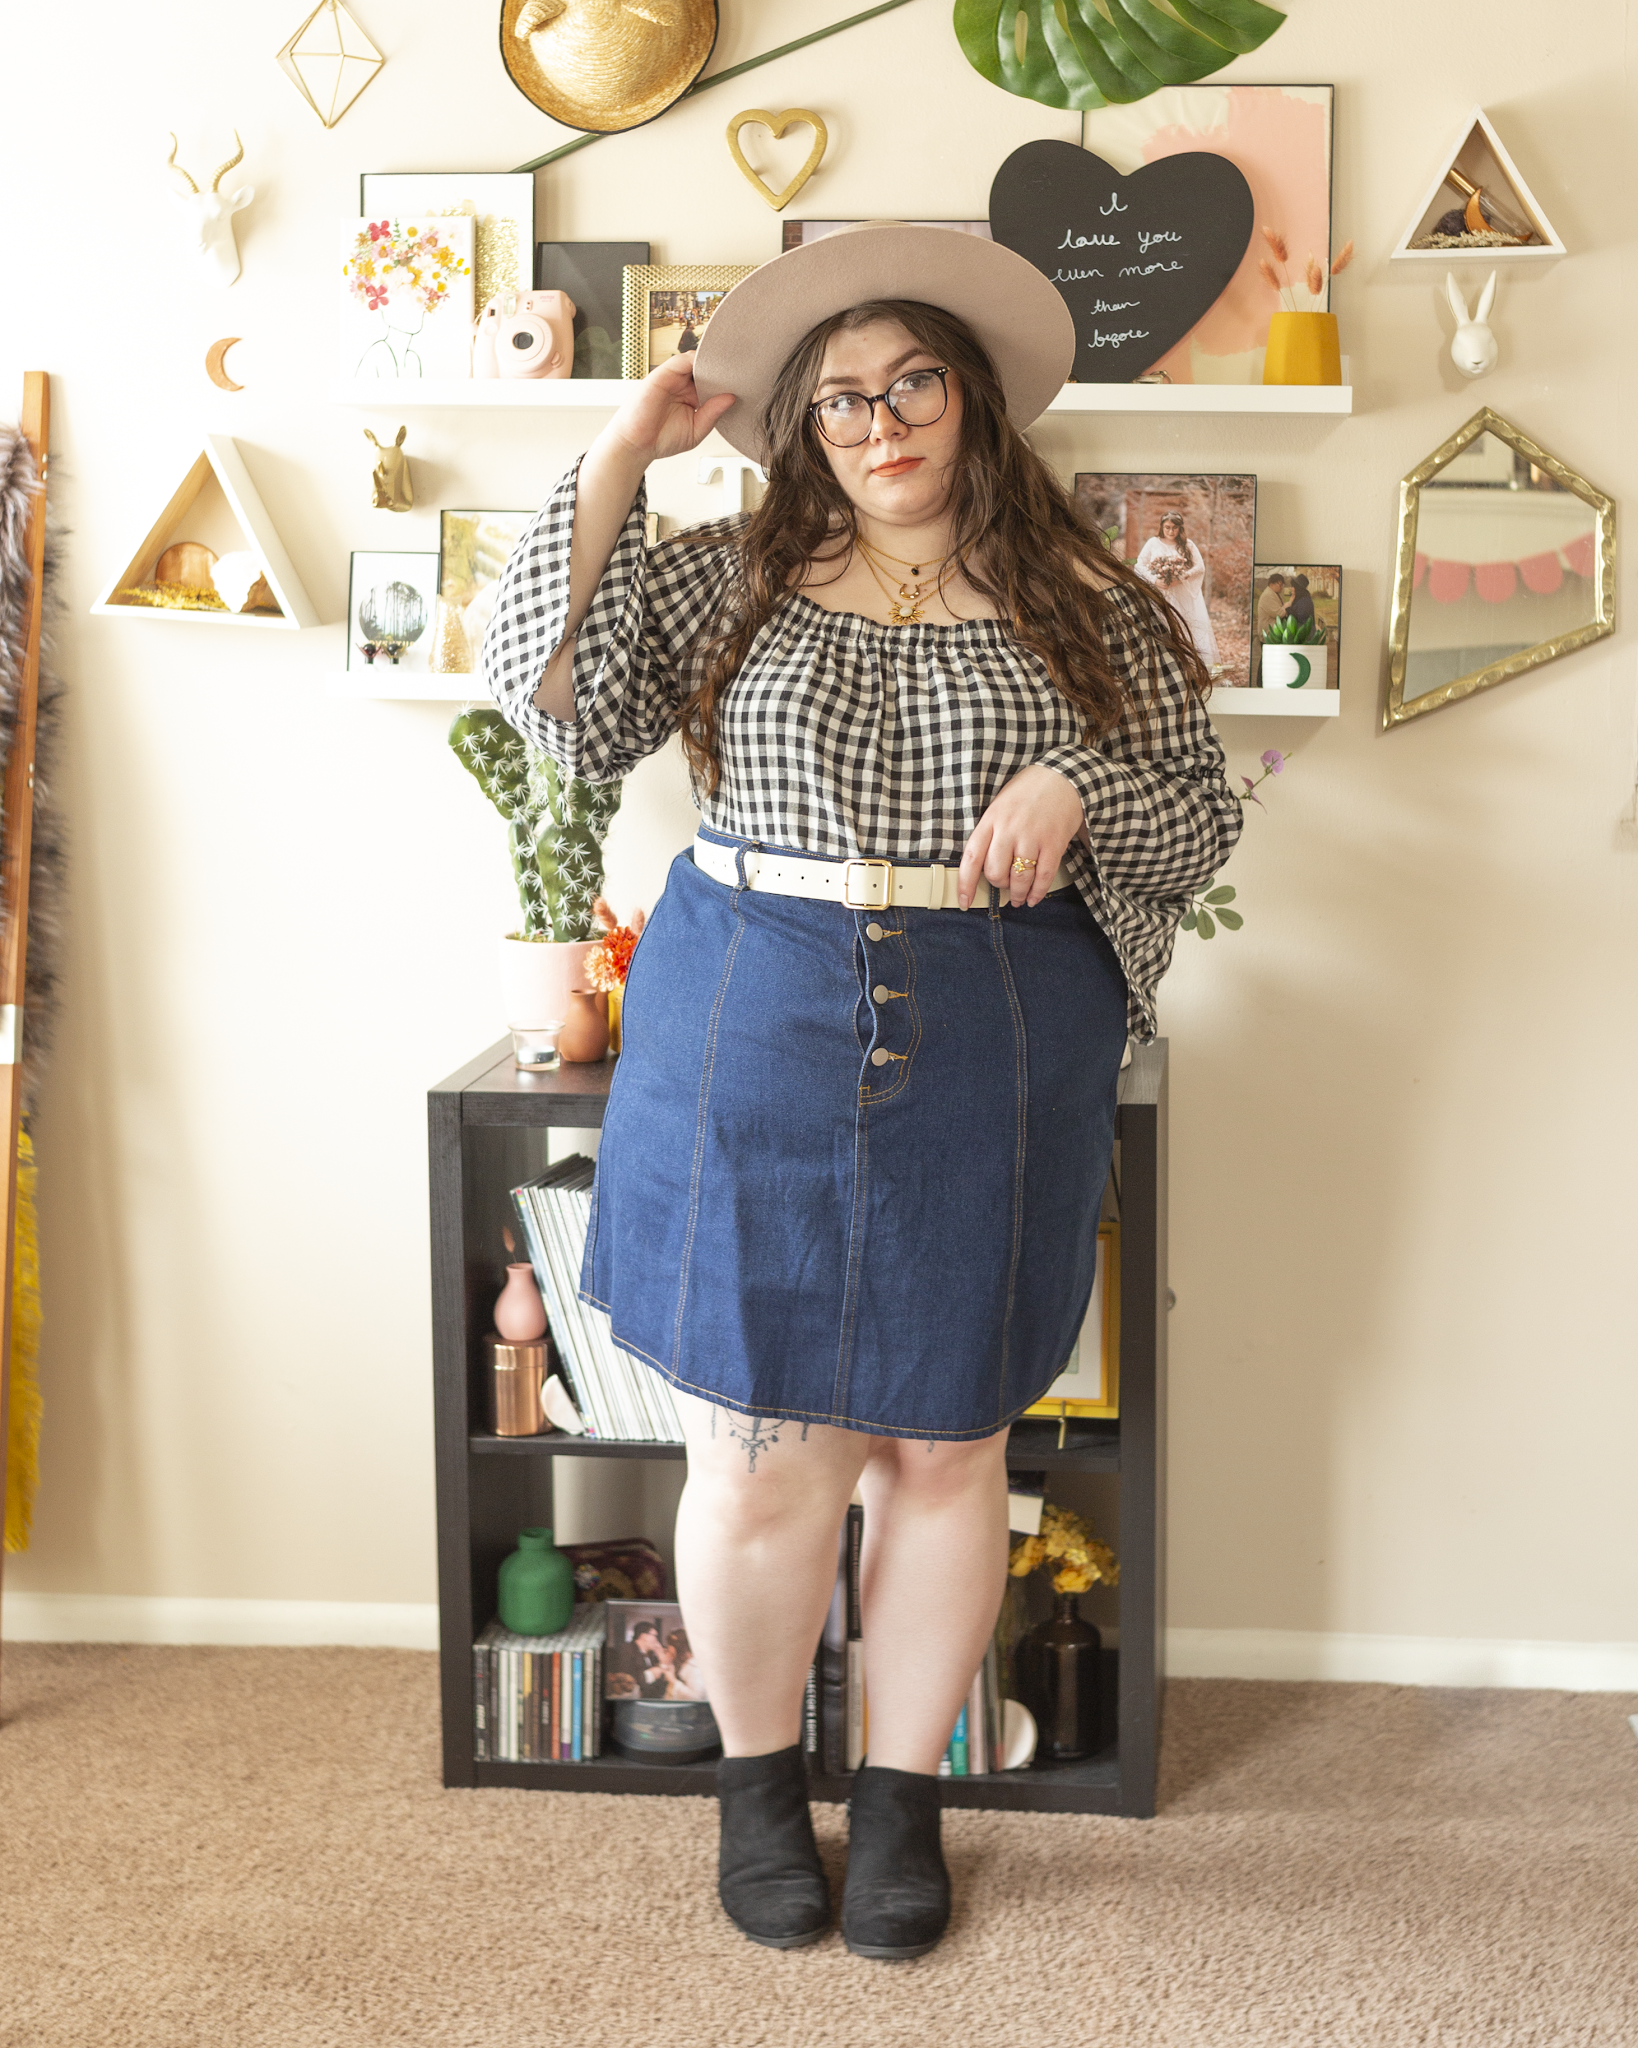 An outfit consisting of a beige wide brim porkpie hat, an off the shoulder black and white gingham blouse tucked into a an a-line denim skirt and black booties.